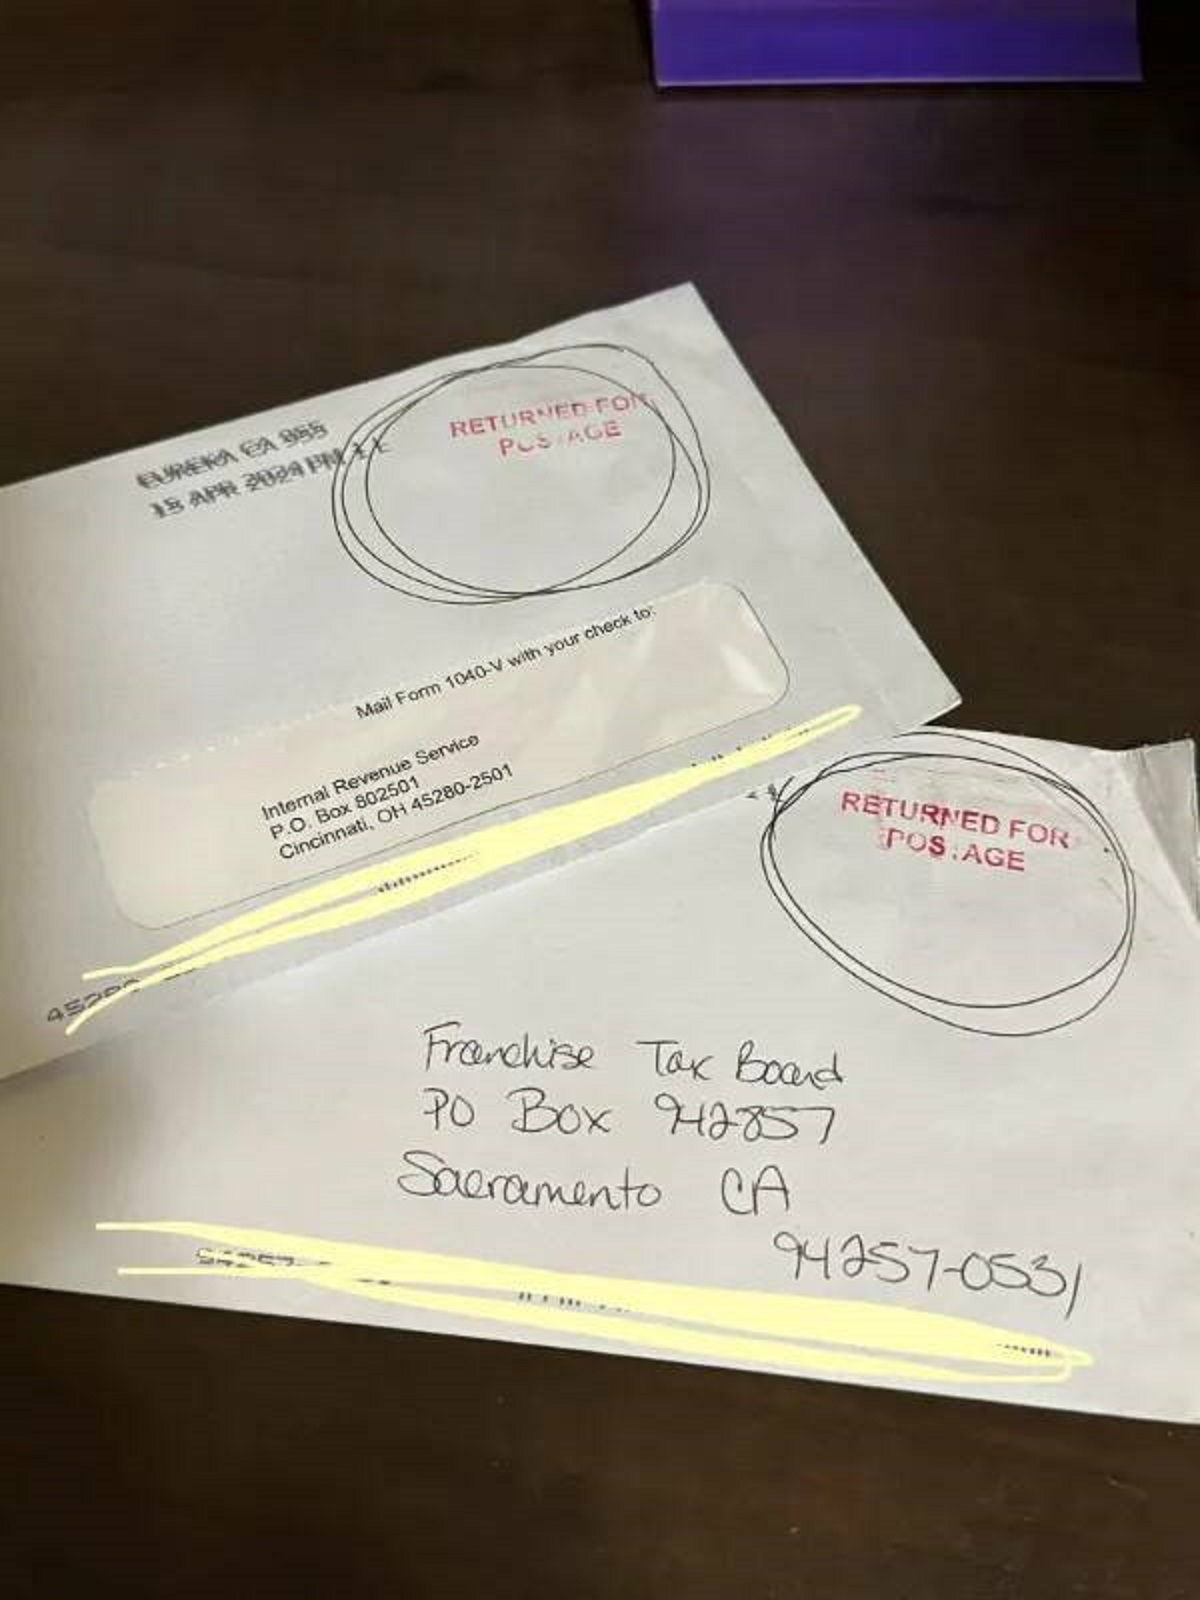 “Had to mail my taxes in this year, and sent them the day I left town. Came home to this.”